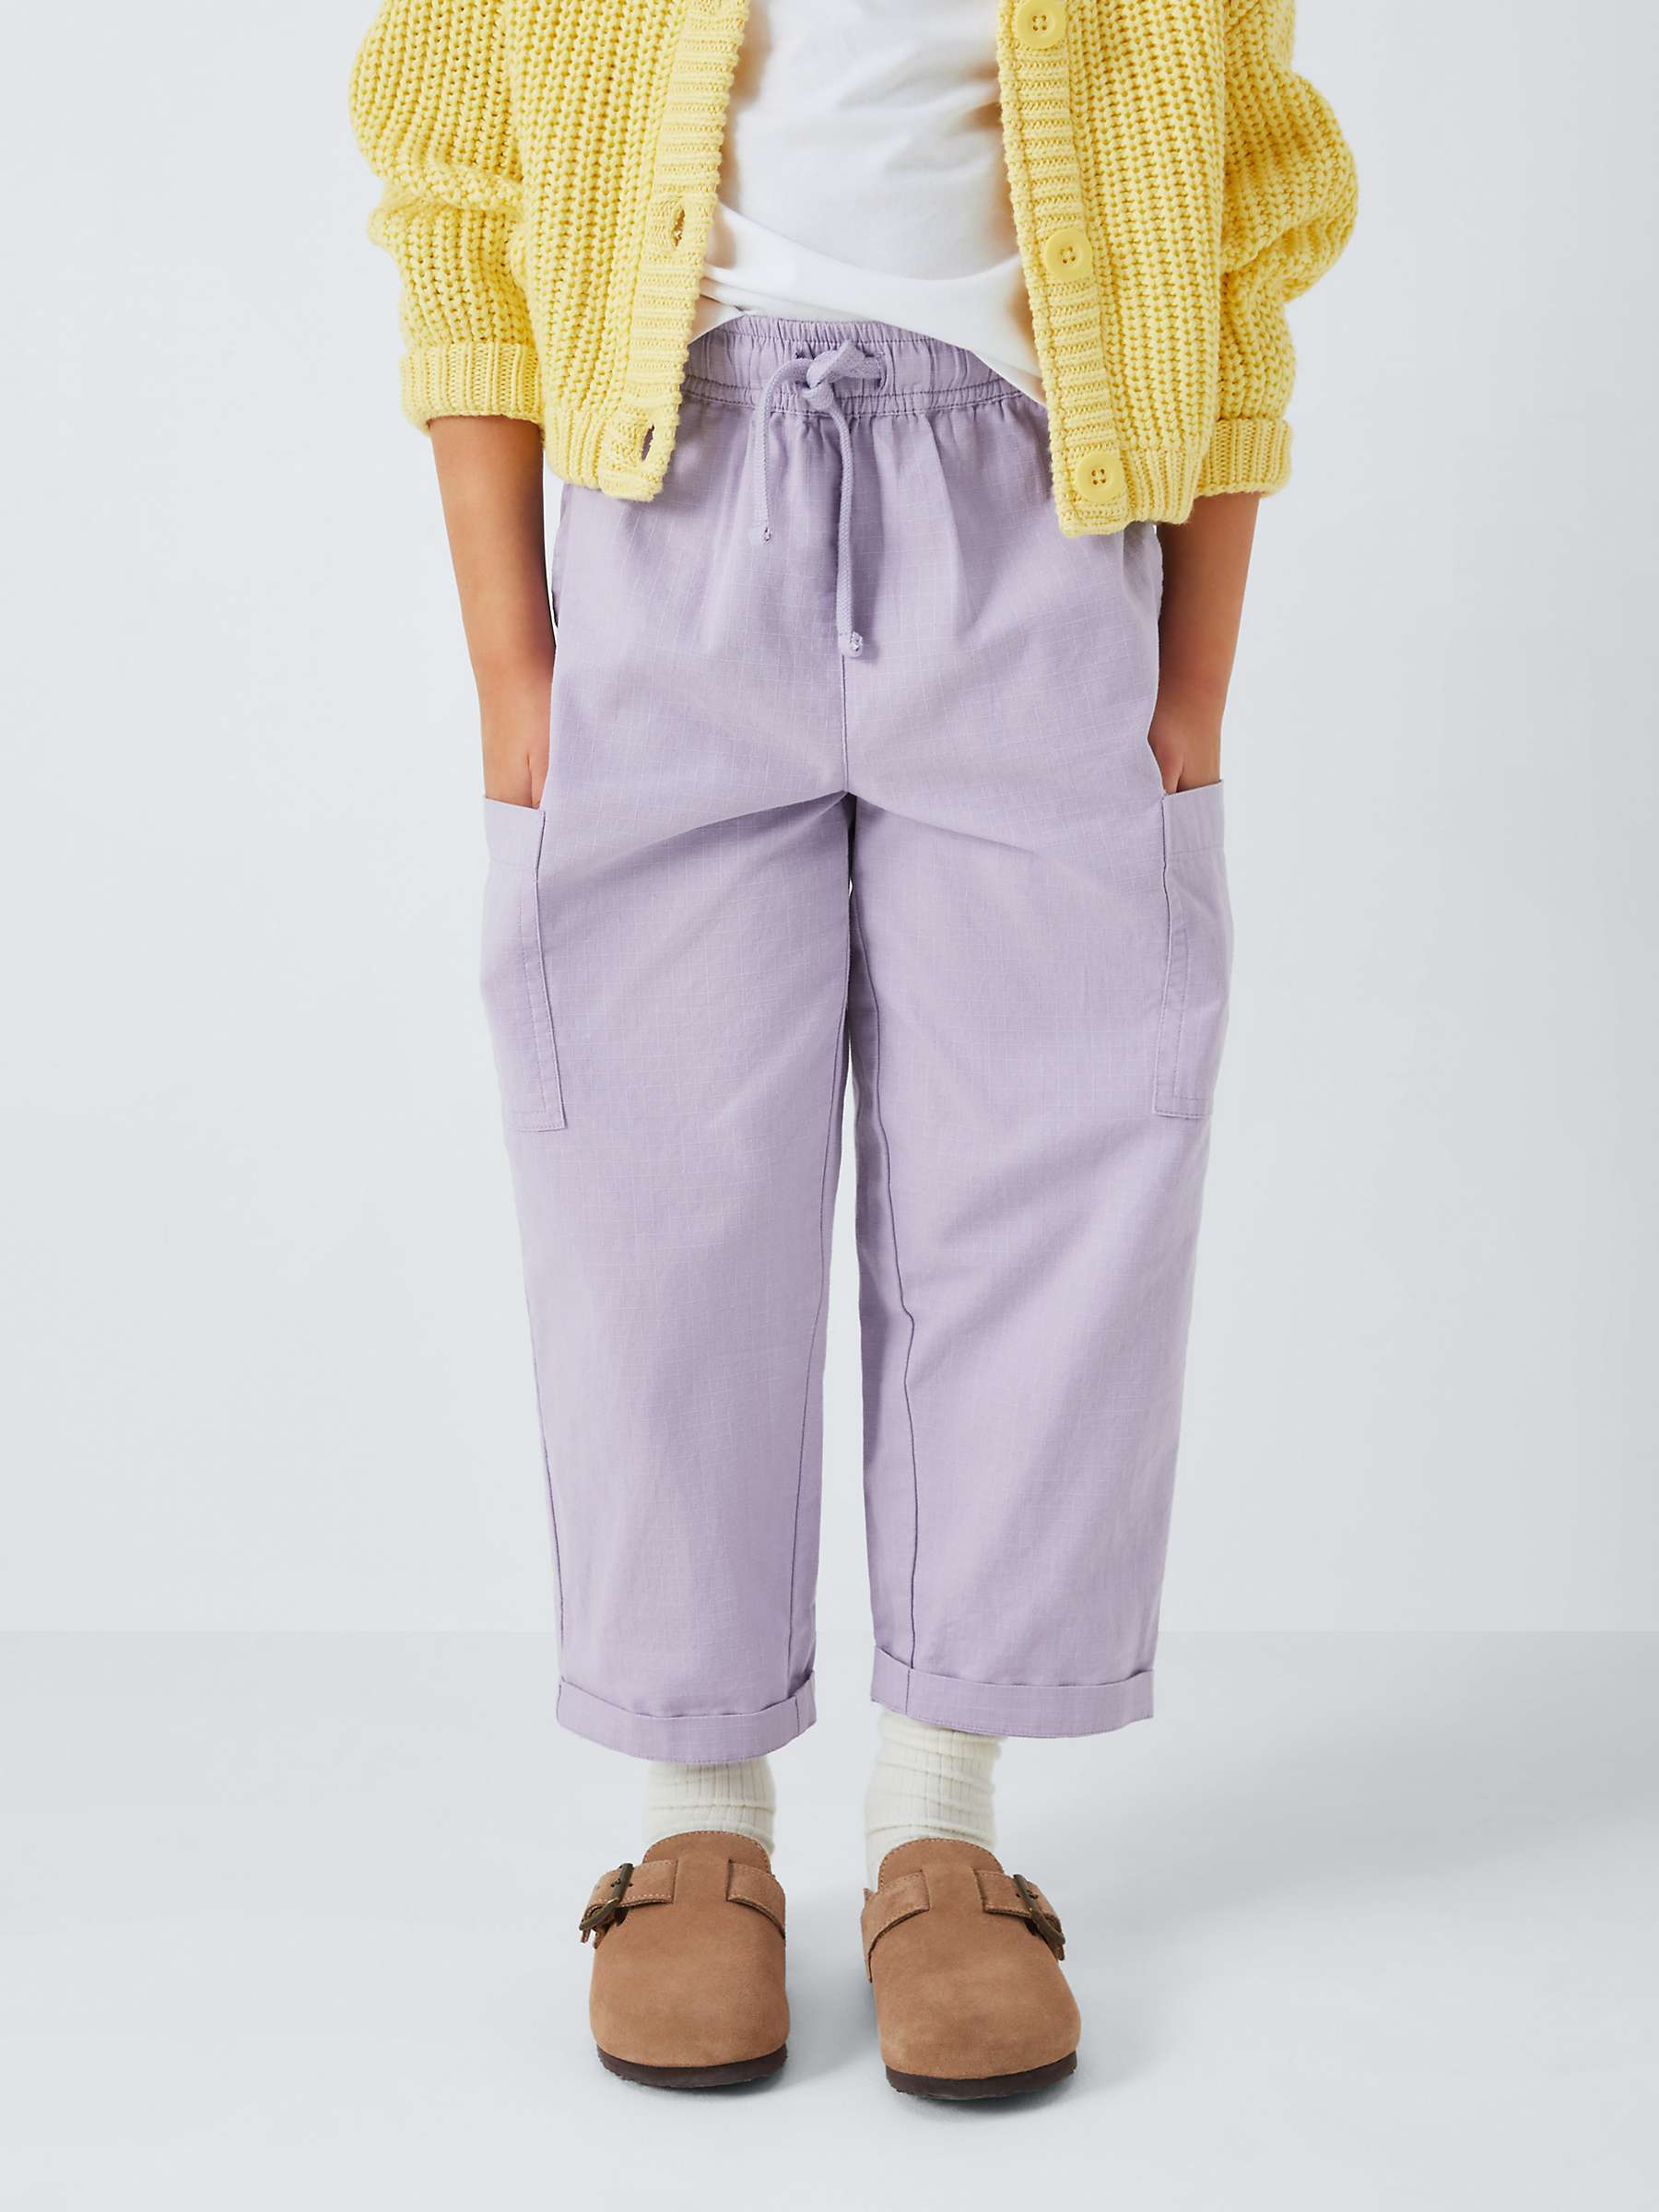 Buy John Lewis ANYDAY Kids' Ripstop Cotton Trousers Online at johnlewis.com